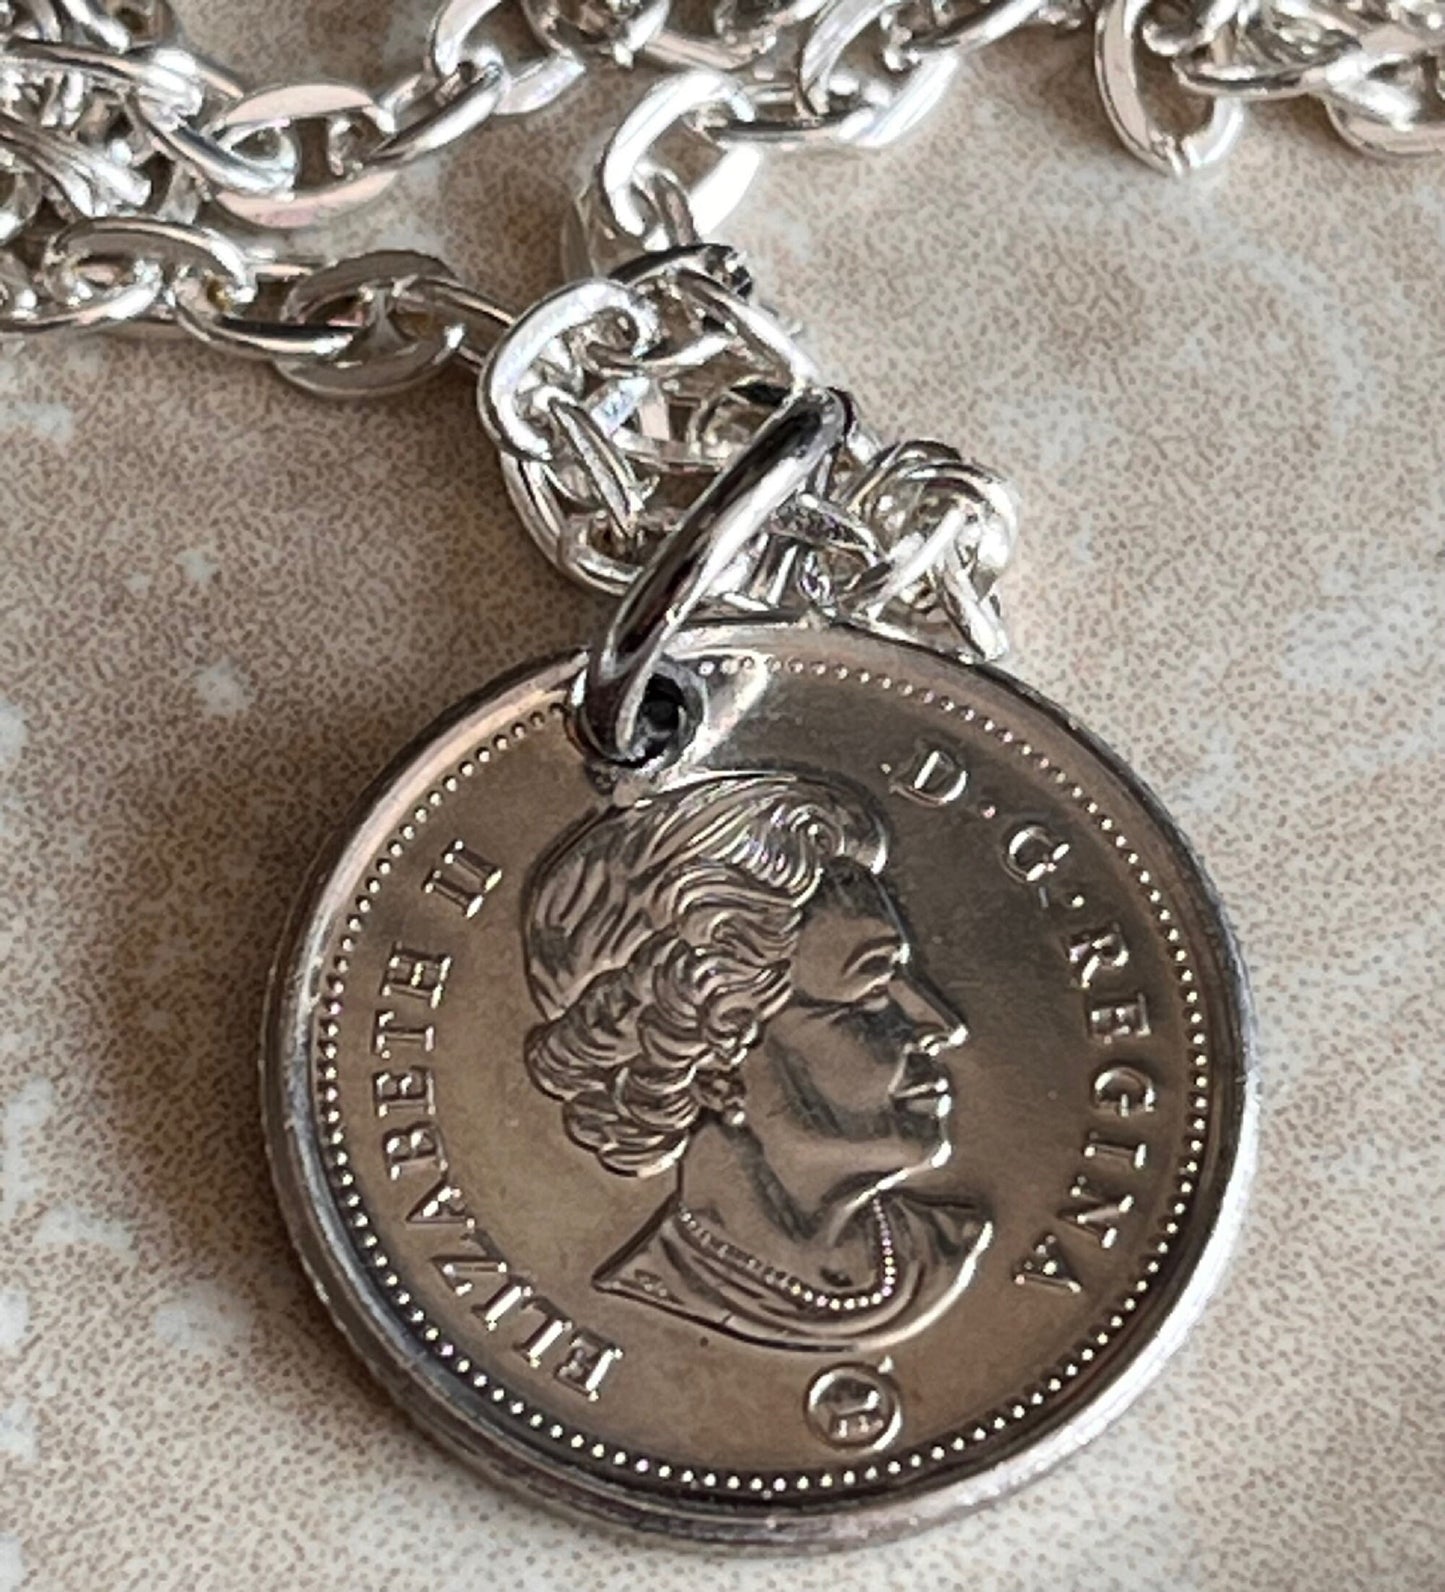 Canadian Dime Coin Pendant Necklace 1921-2021 Blue 10 Cents Necklace Jewelry Charm Gift Friend Charm Gift For Him, Her World Coins Collector